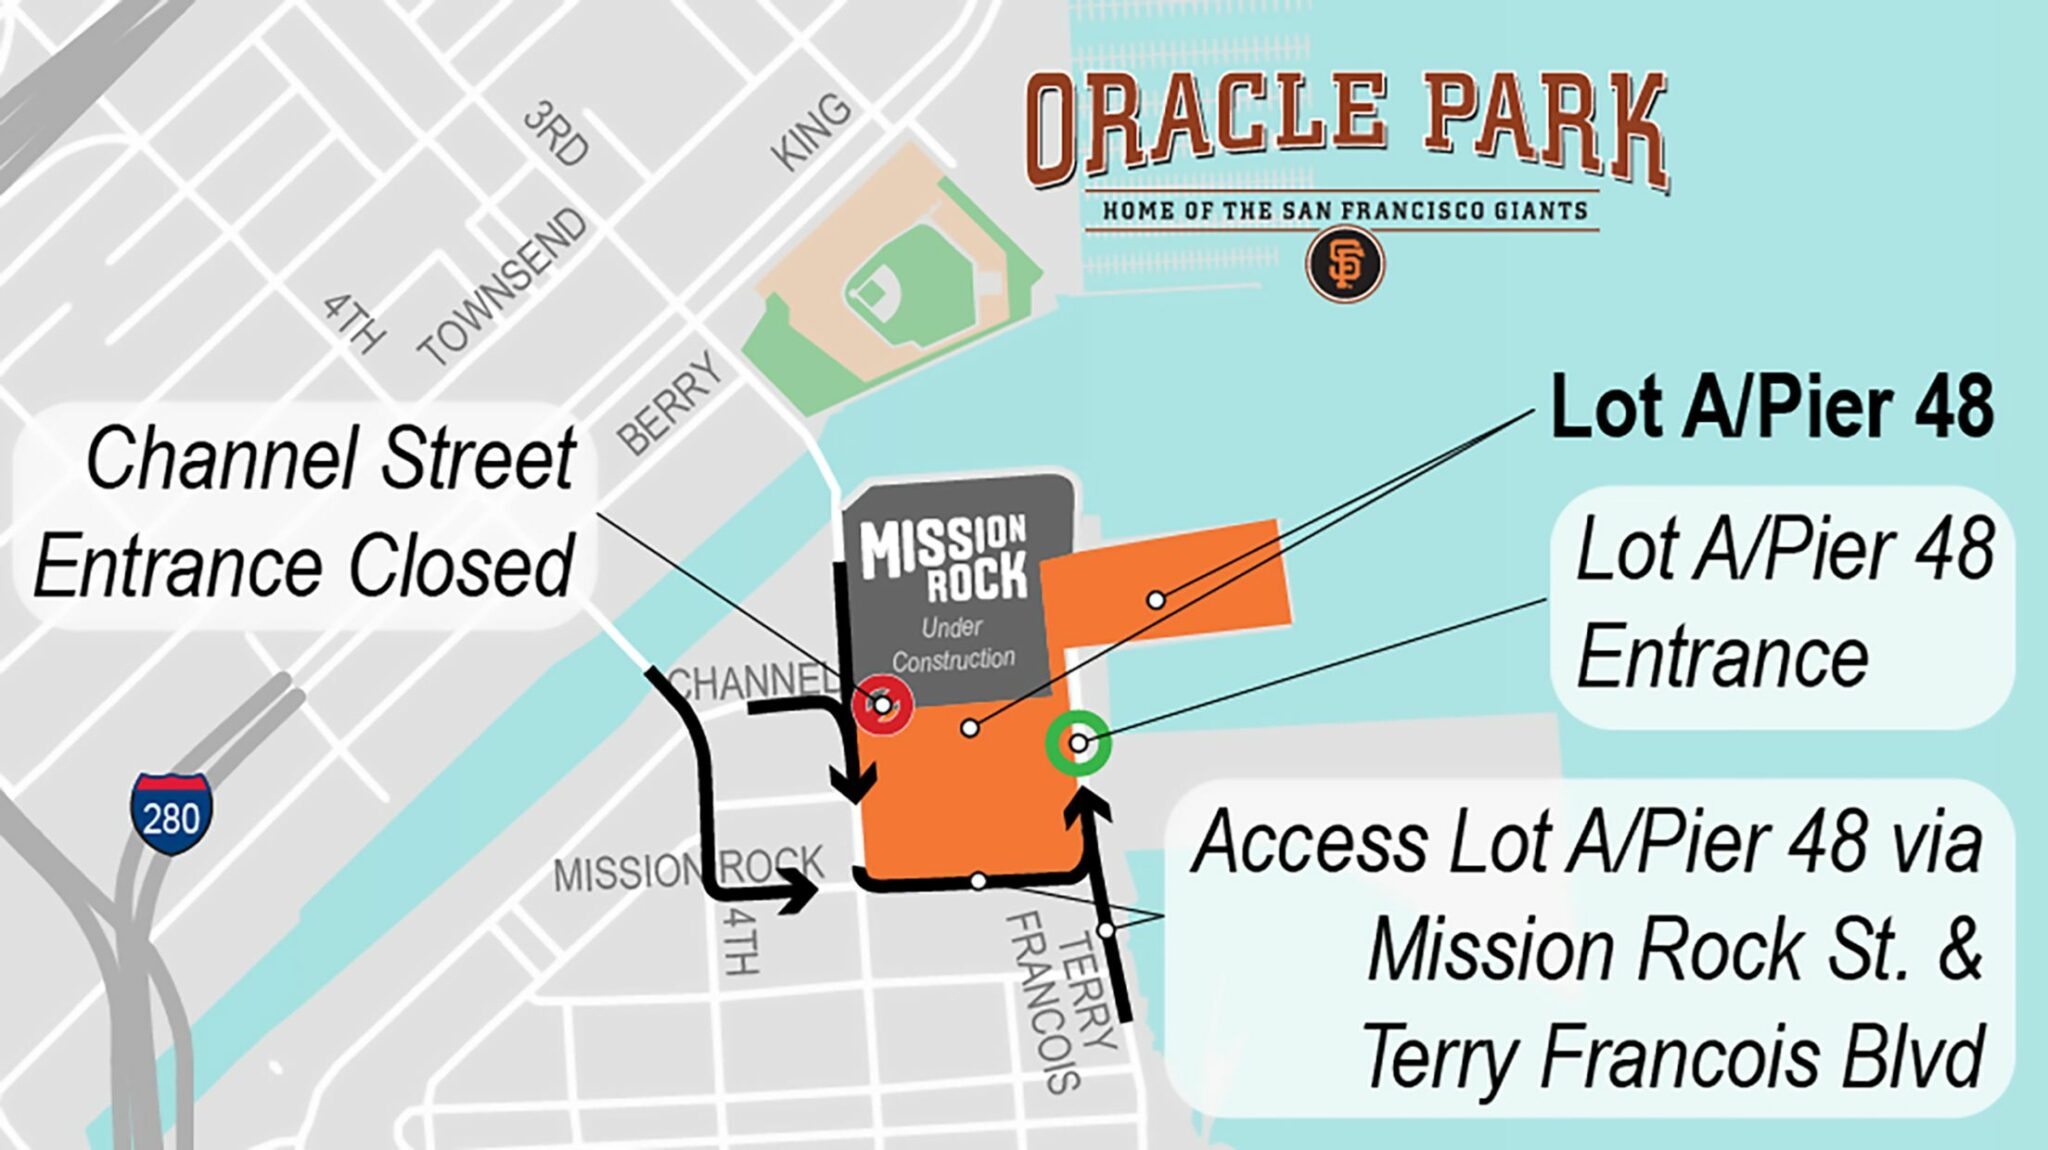 Oracle Park Parking Guide Tips, Map, Lots WorldWire